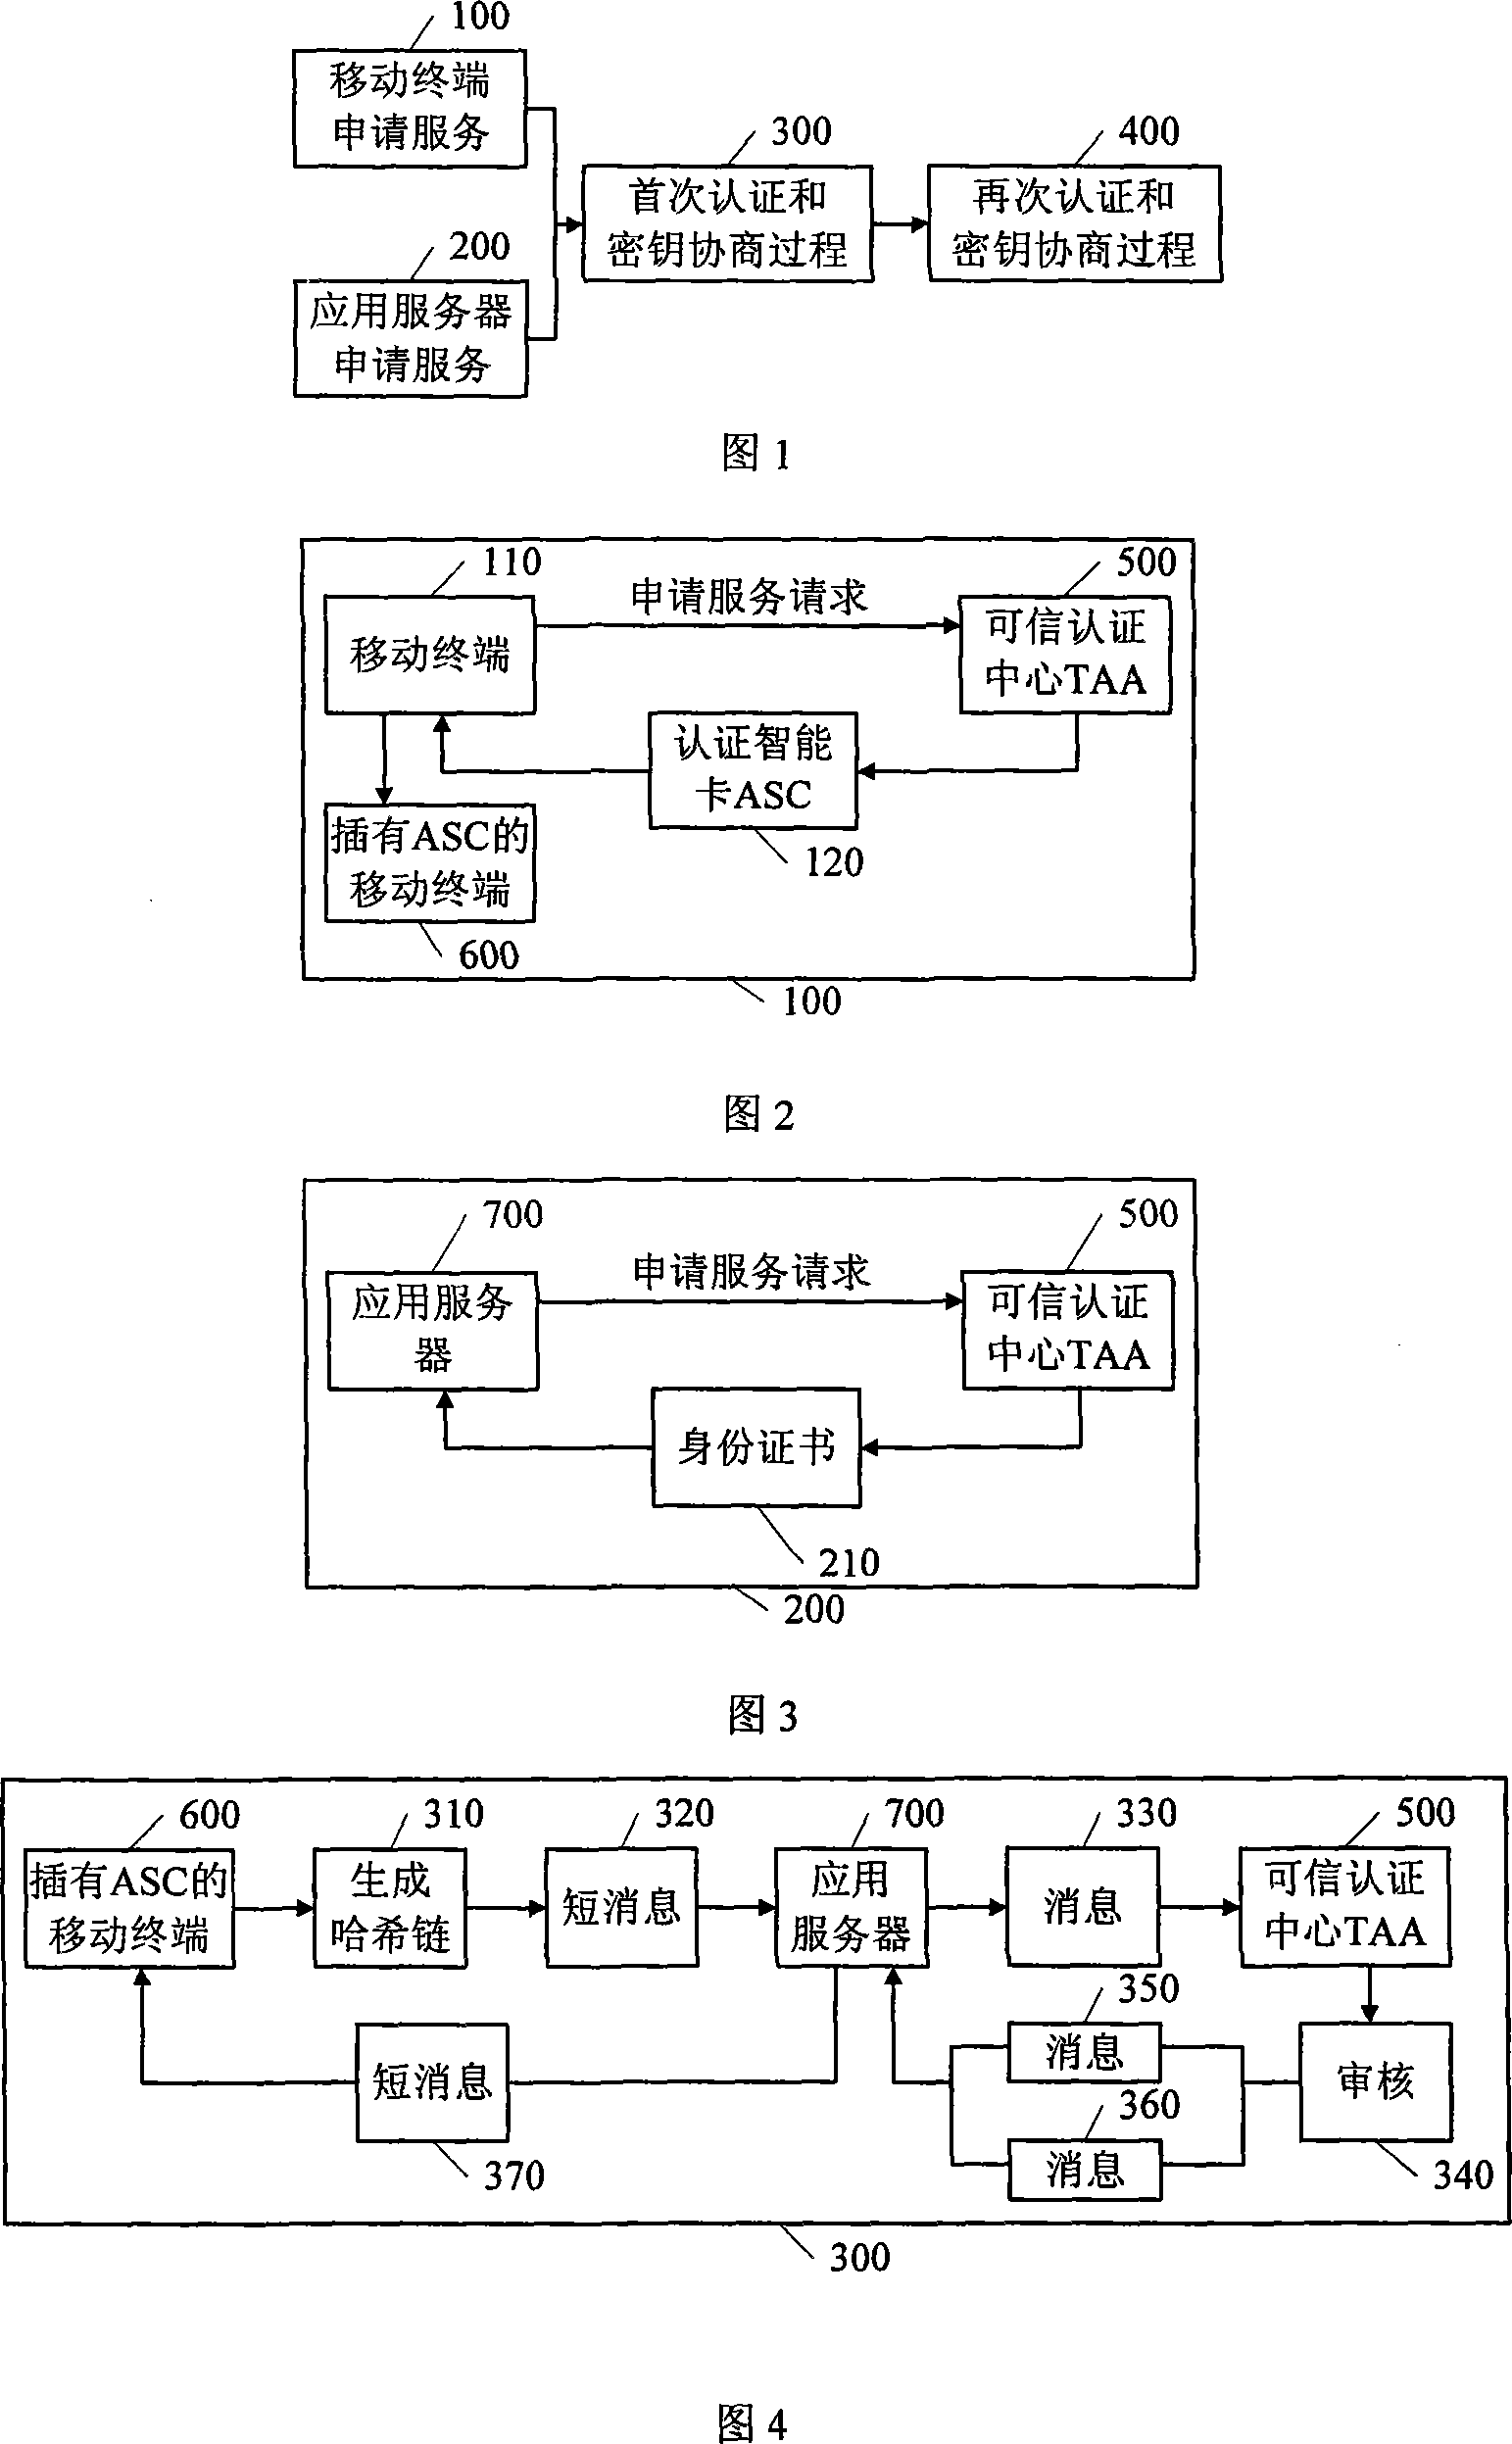 Method for realizing intra-mobile entity authentication and cipher key negotiation using short message